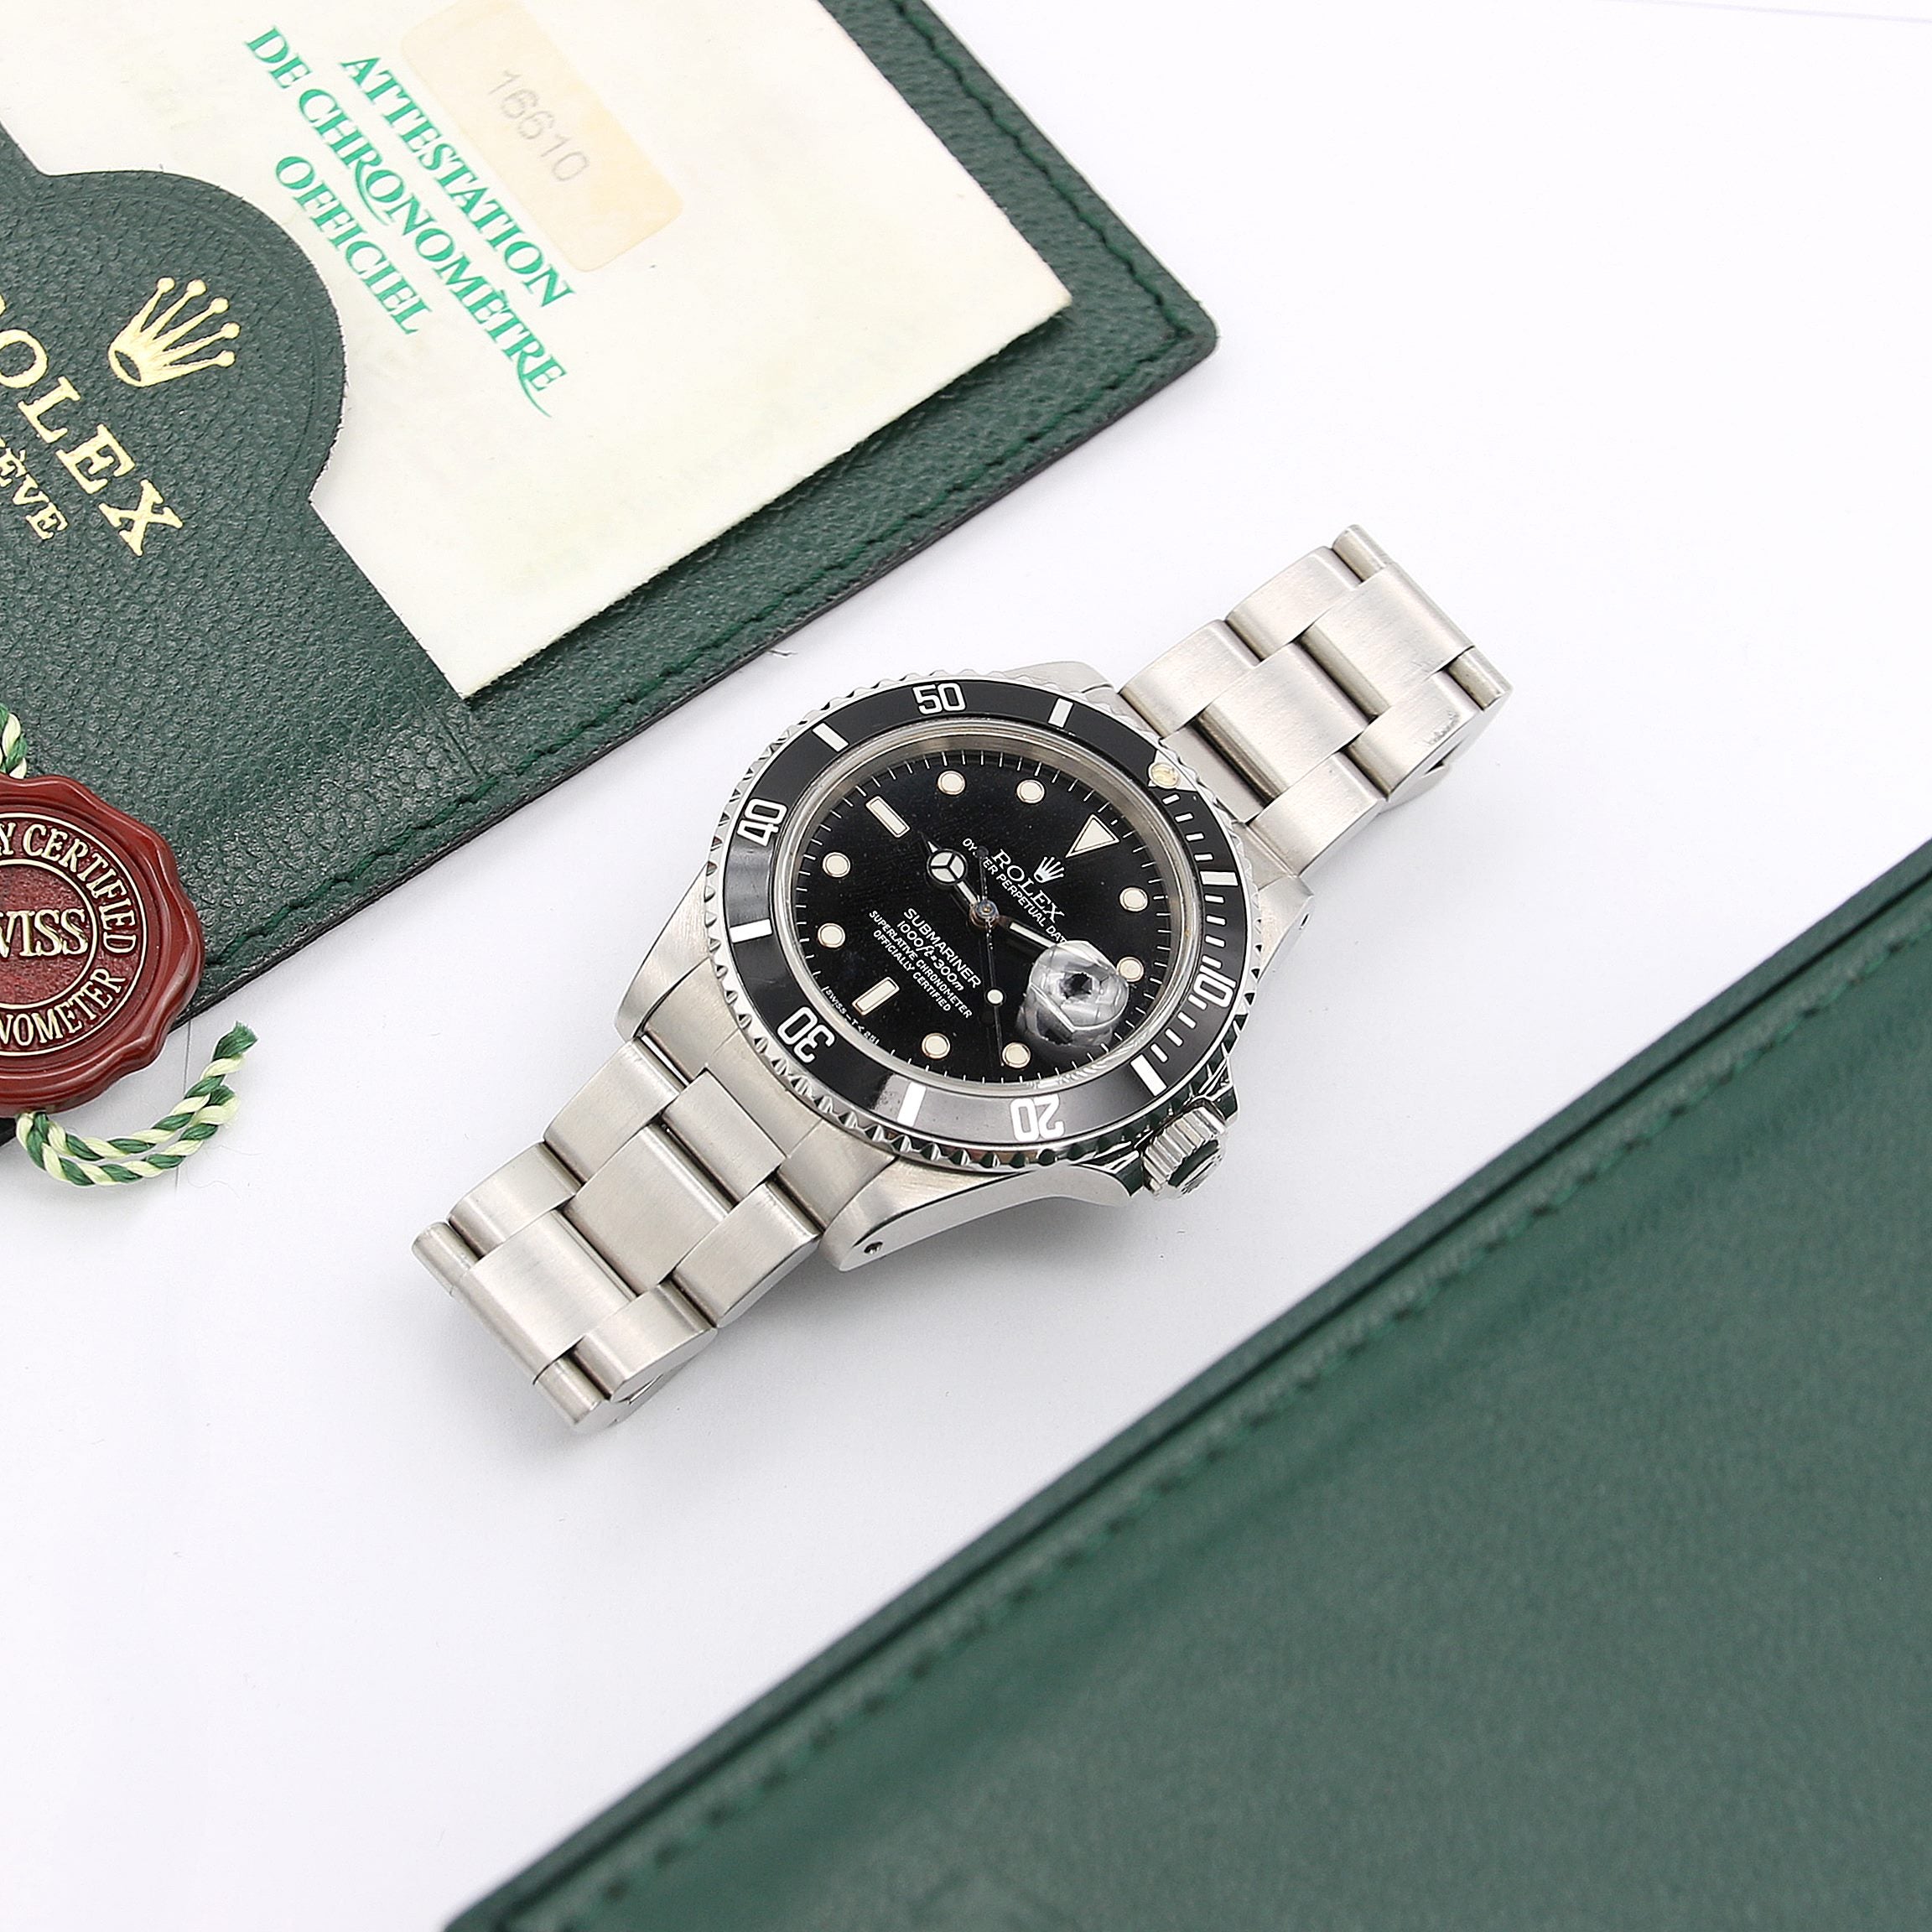 Rolex Oyster Perpetual Submariner Date Stainless Steel 16610